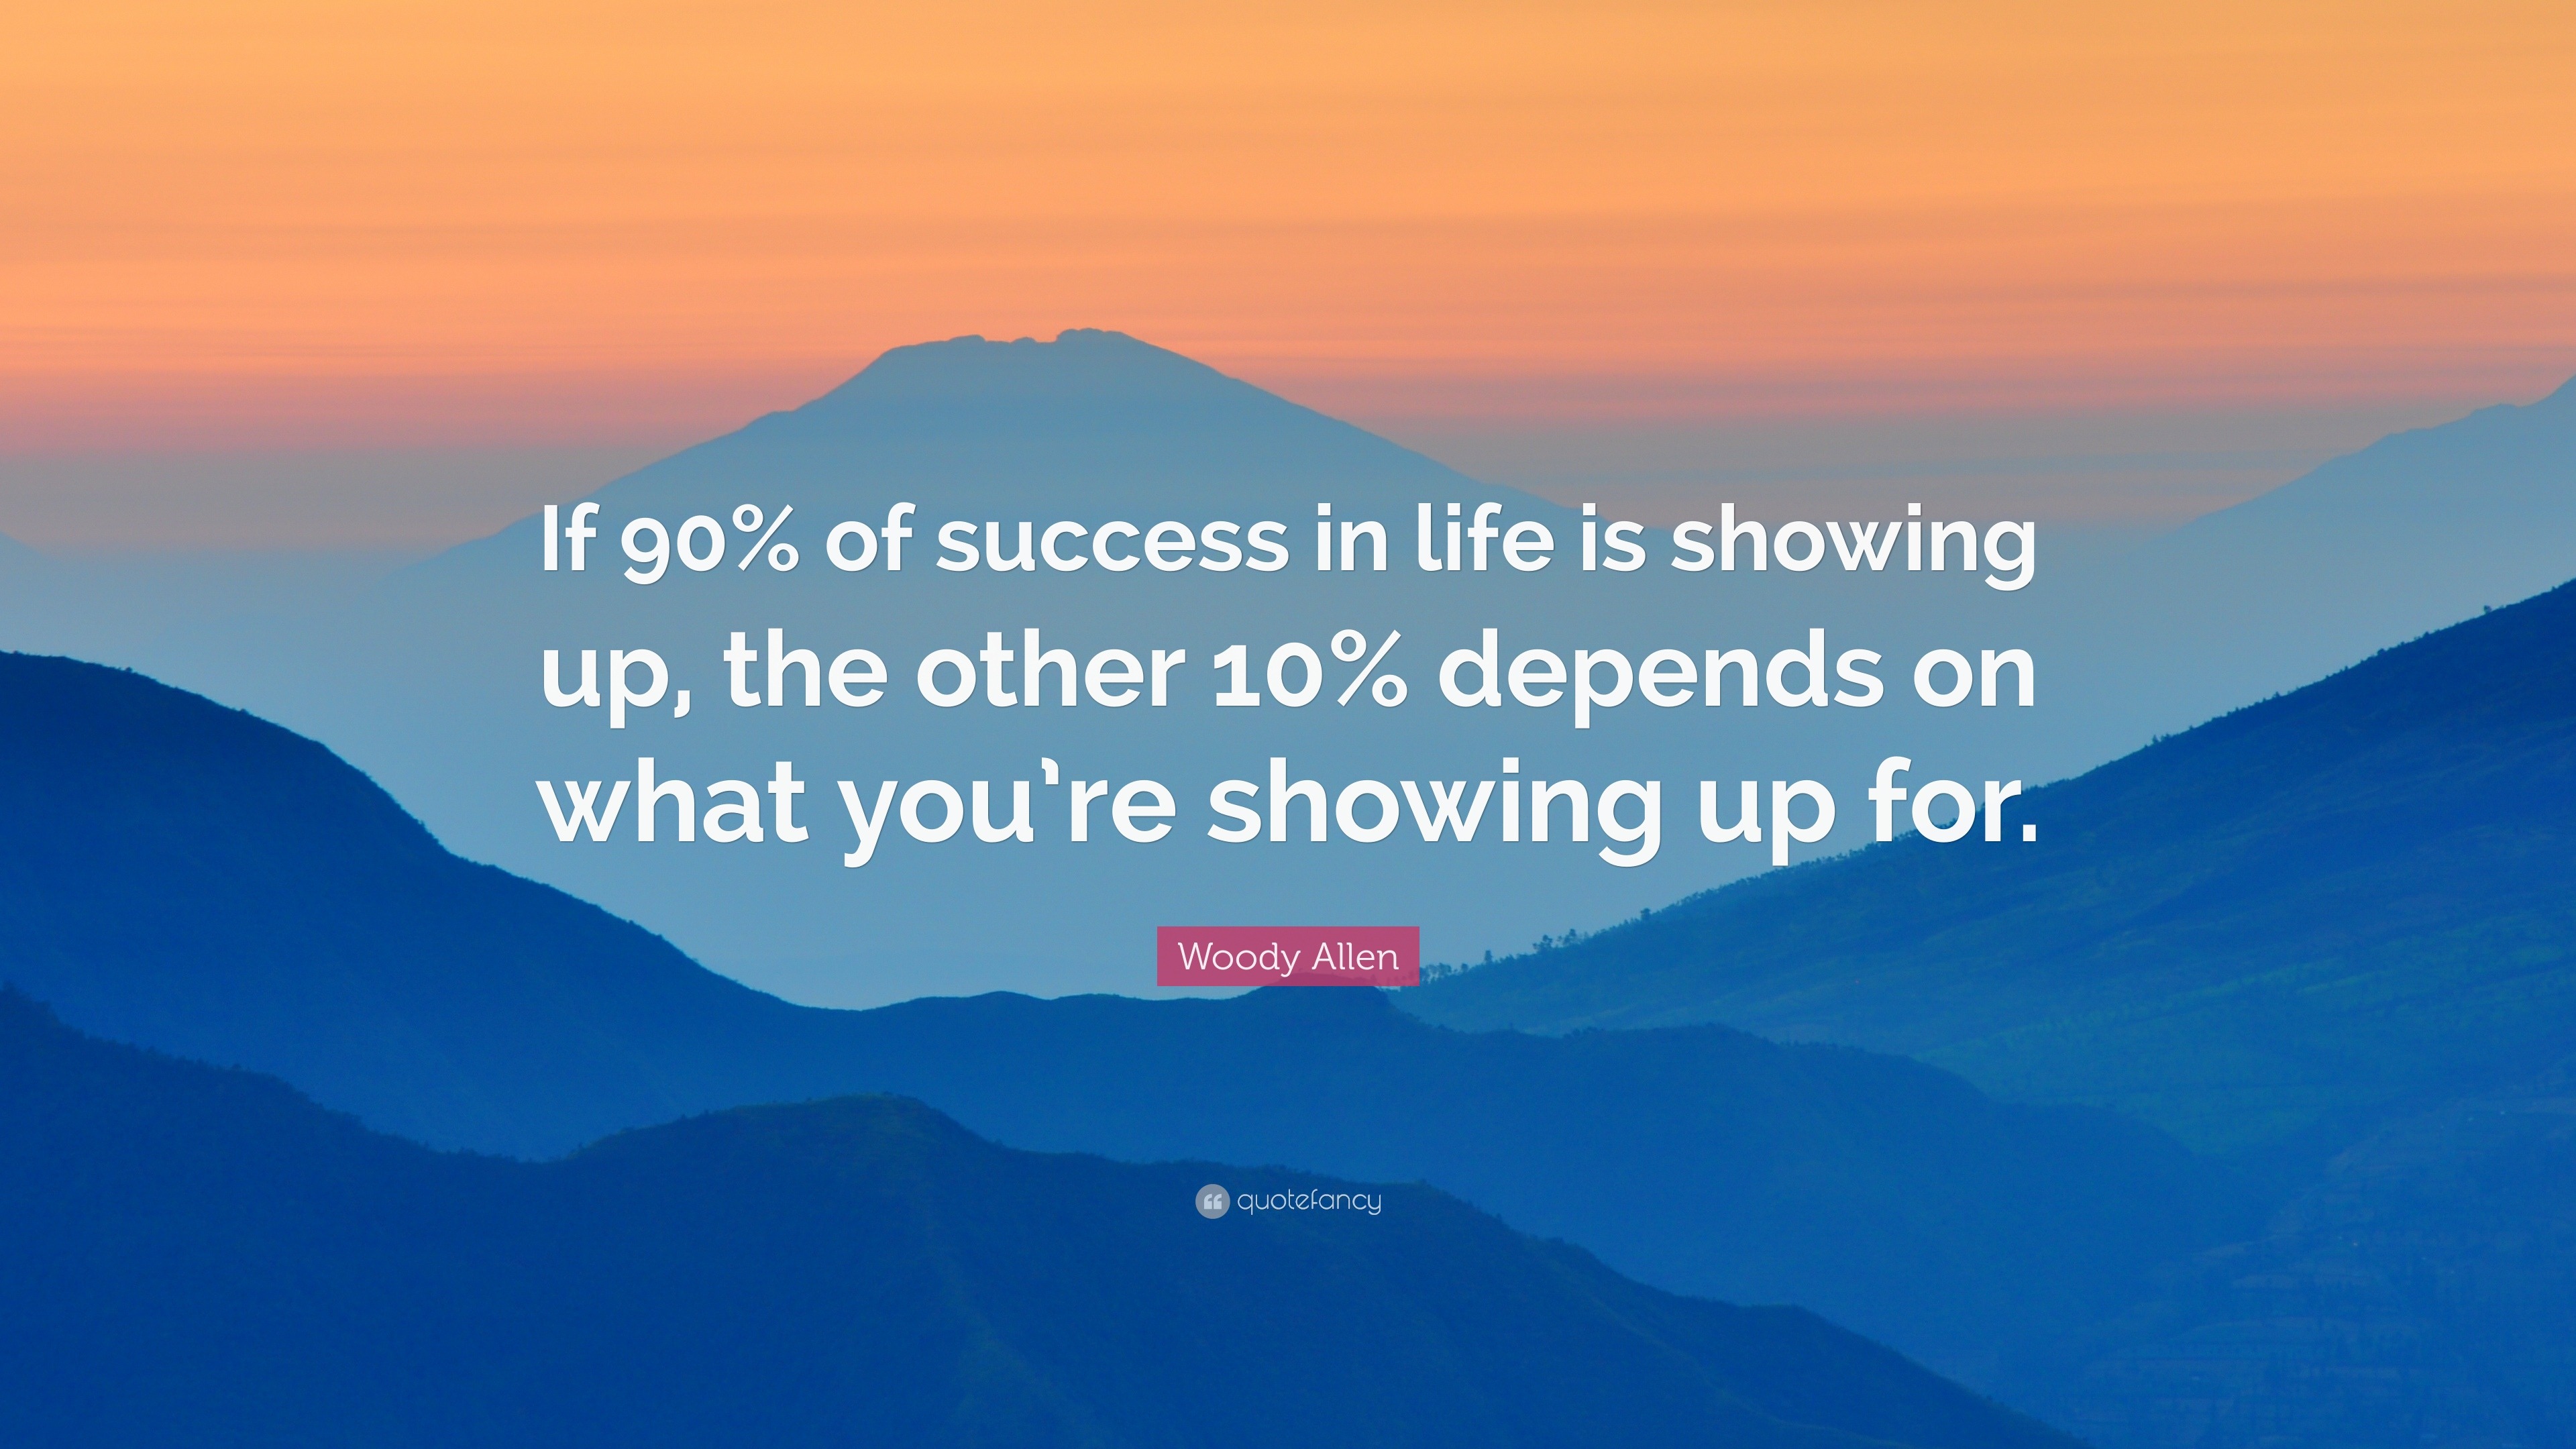 Woody Allen Quote: “If 90% of success in life is showing up, the other ...